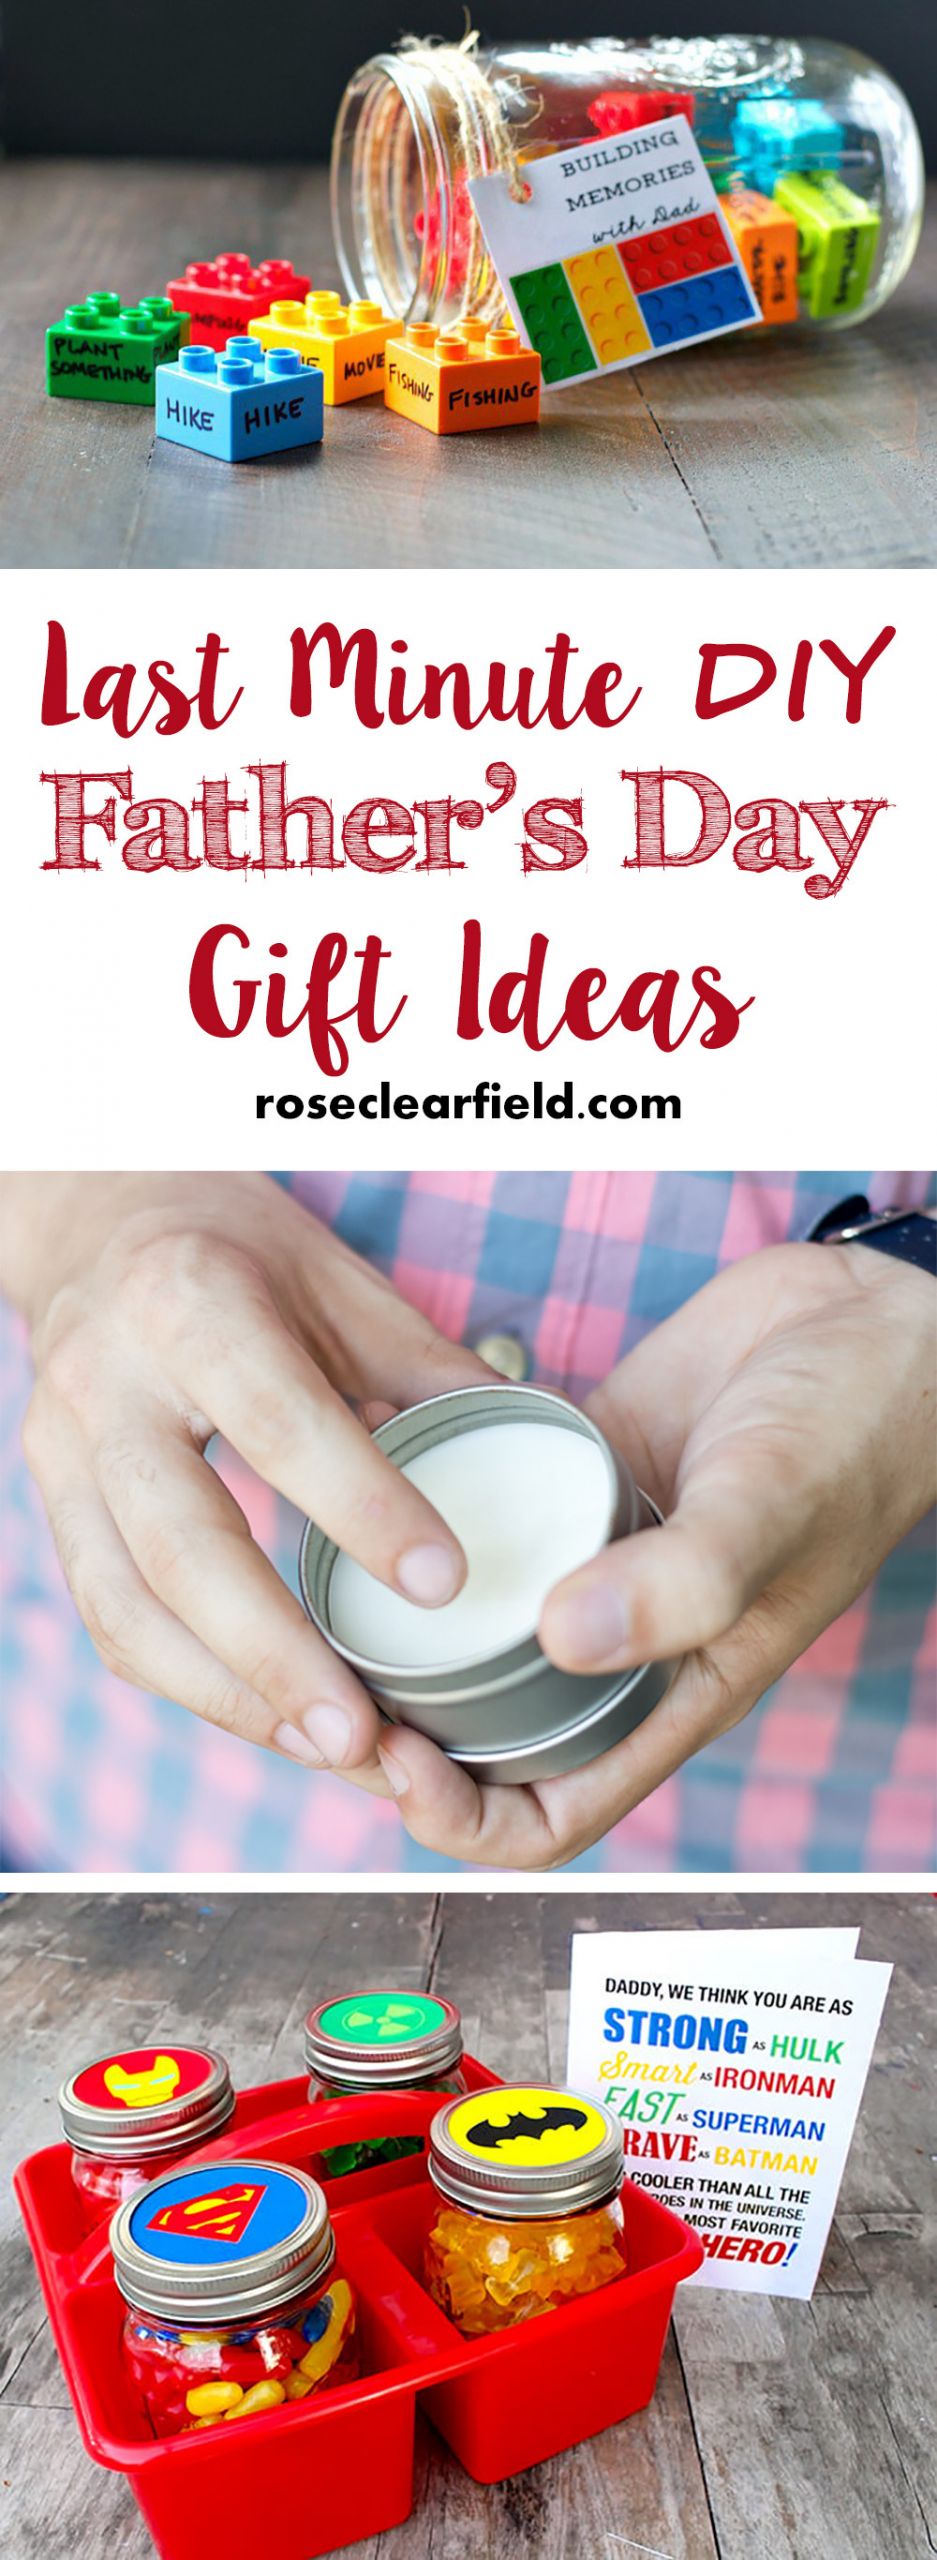 Homemade Fathers Day Gifts Ideas
 Last Minute DIY Father s Day Gift Ideas • Rose Clearfield